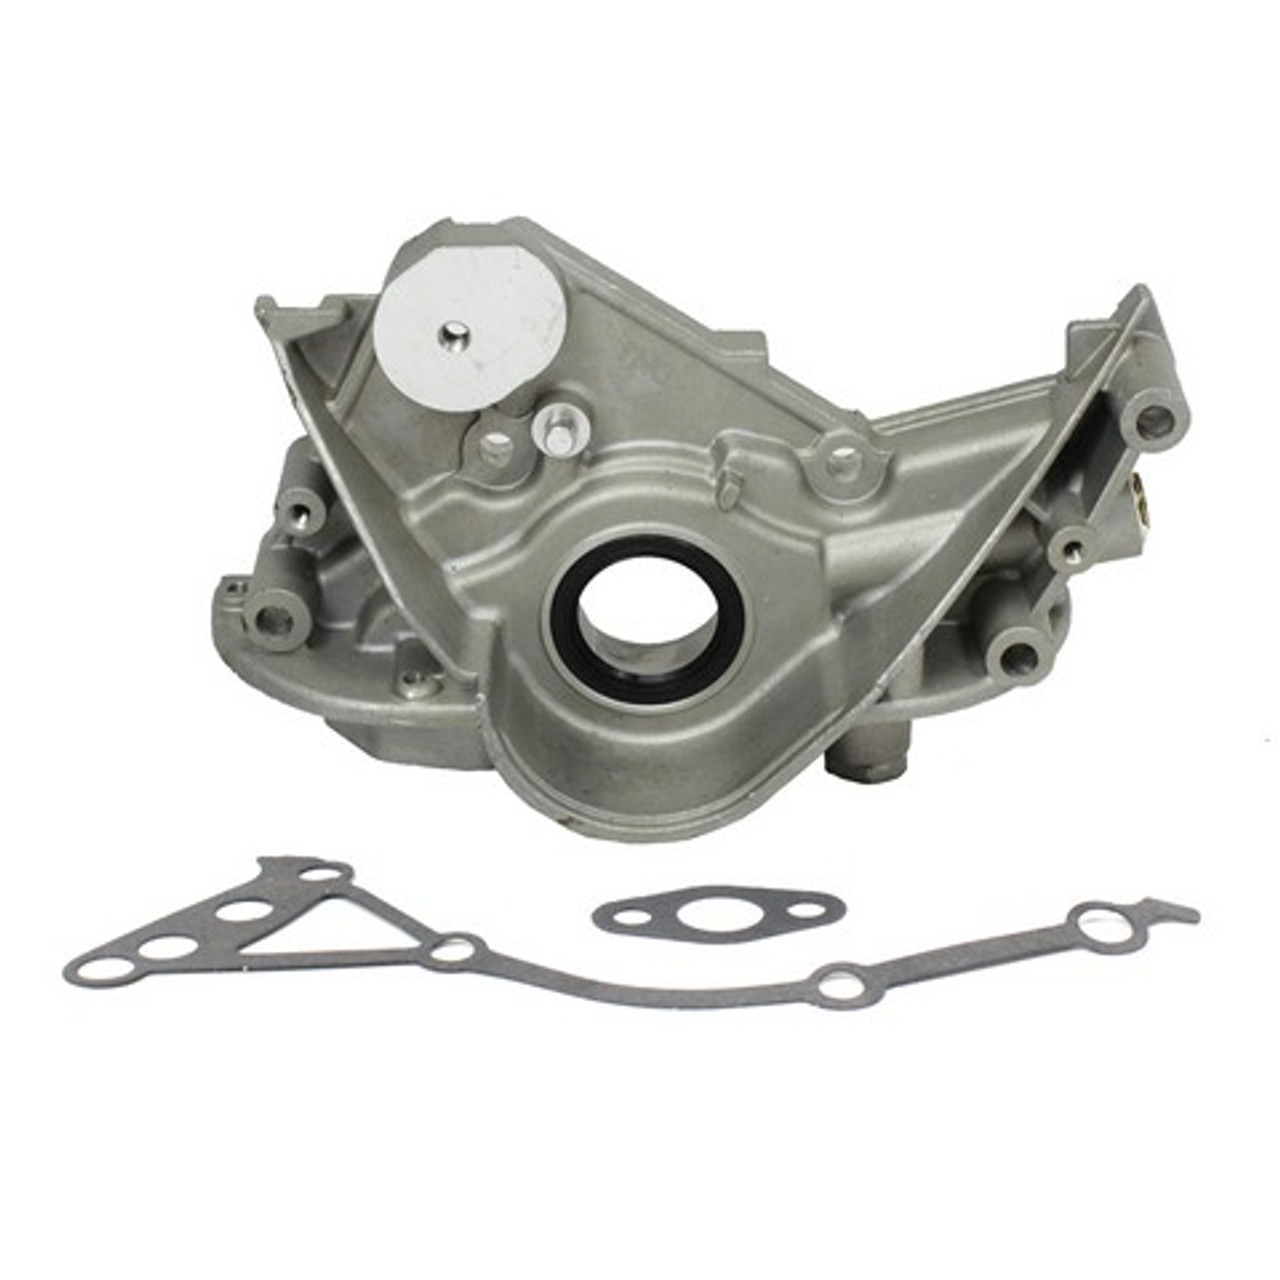 Oil Pump 3.0L 1995 Plymouth Grand Voyager - OP125.73